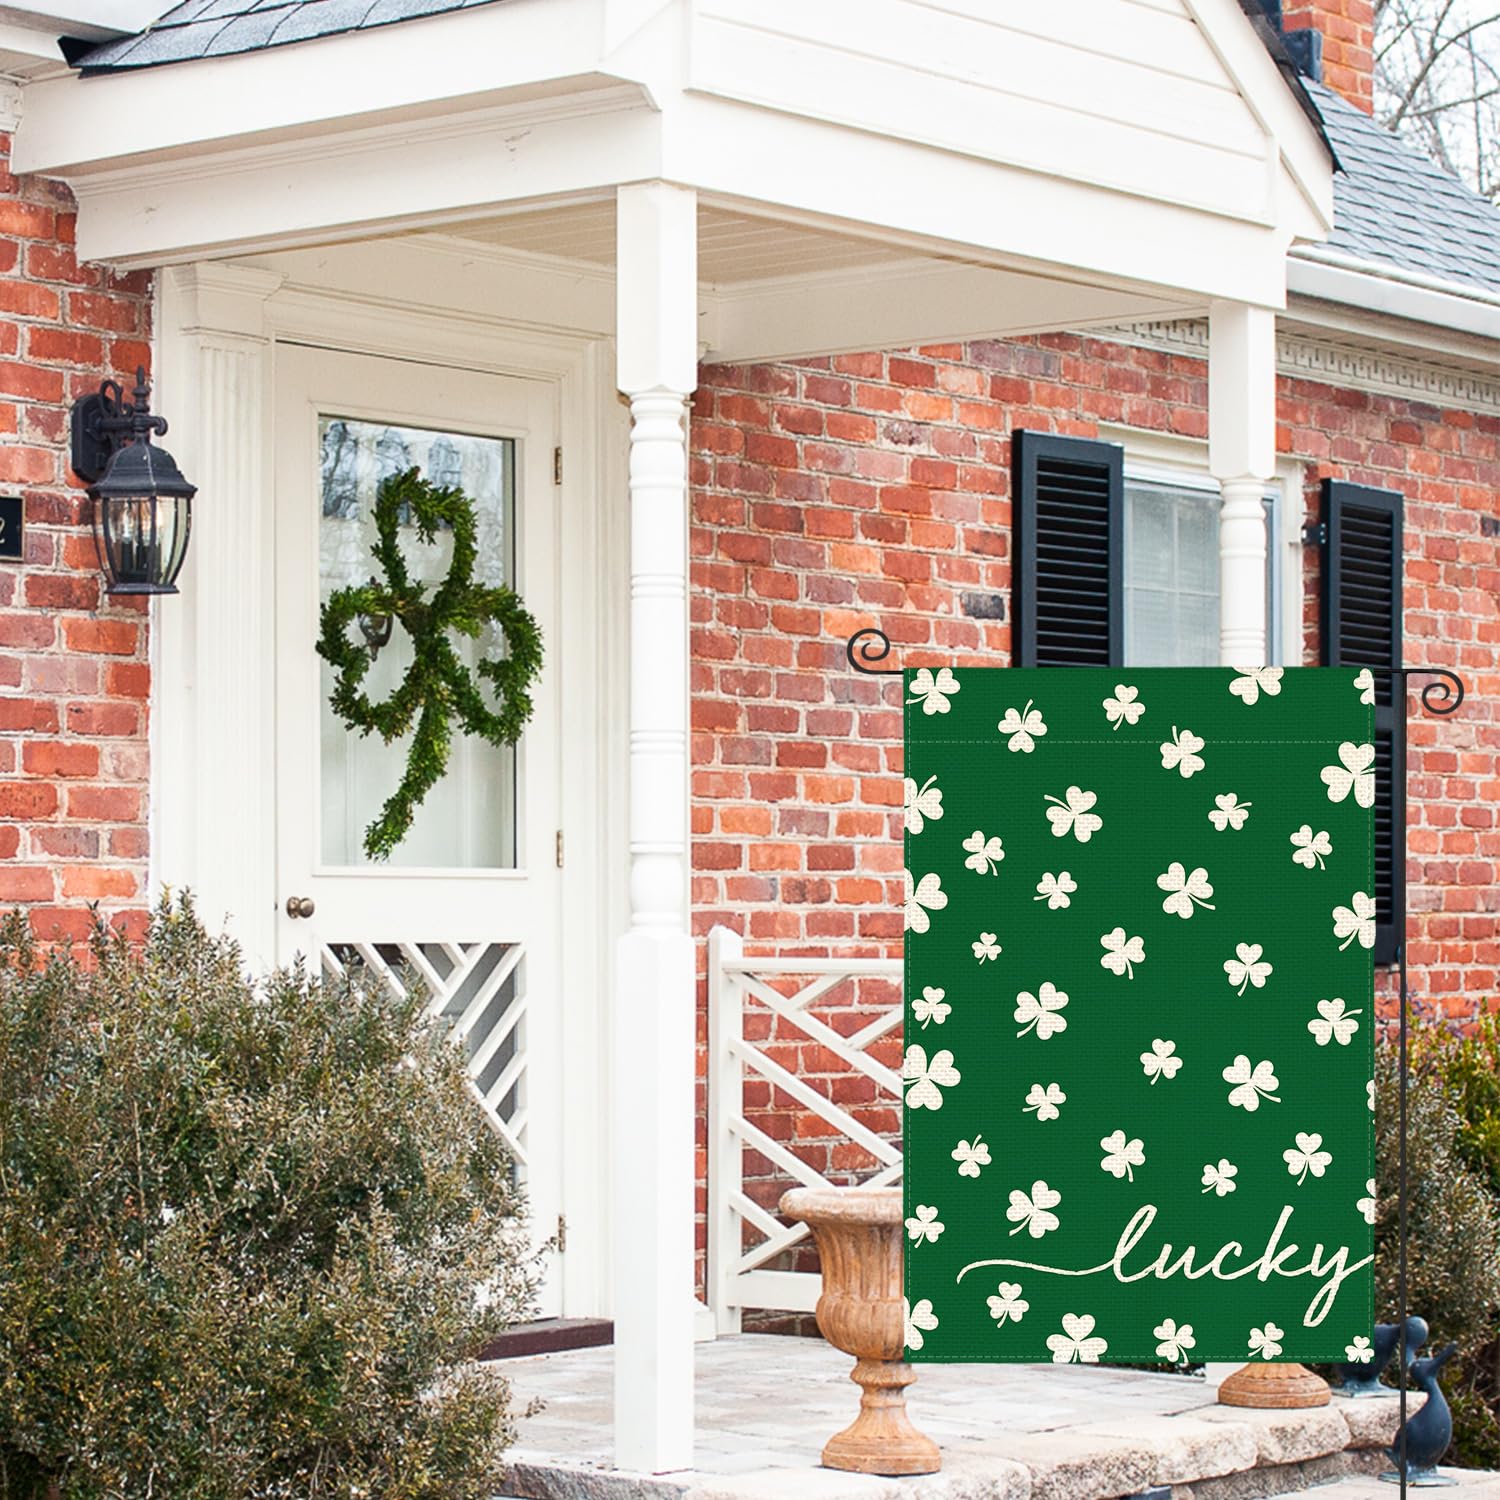 AVOIN colorlife St Patricks Day Lucky Garden Flag 12x18 Inch Double Sided Outside, Floral Small Burlap Shamrocks Clovers Yard Outdoor Decoration